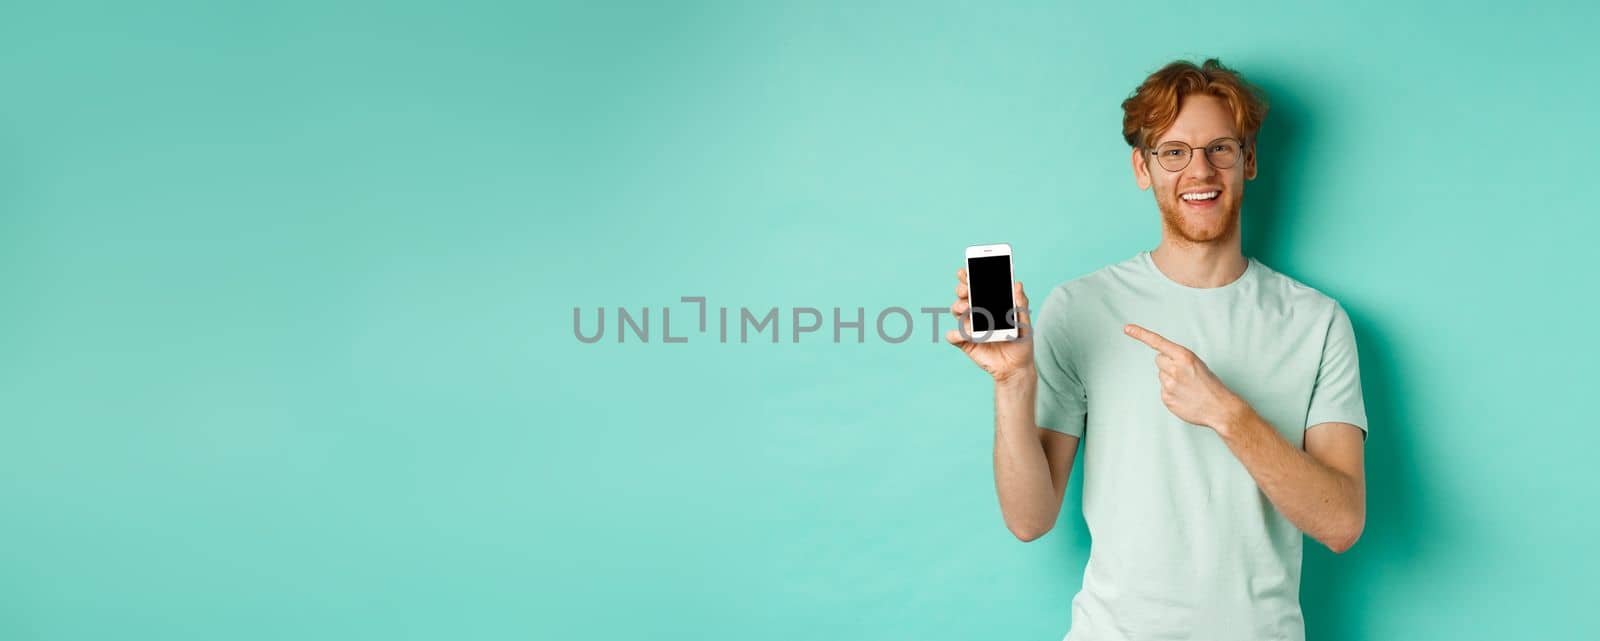 Attractive young man with red beard and hair pointing finger at blank smartphone screen, showing online promotion or app, smiling at camera, turquoise background by Benzoix